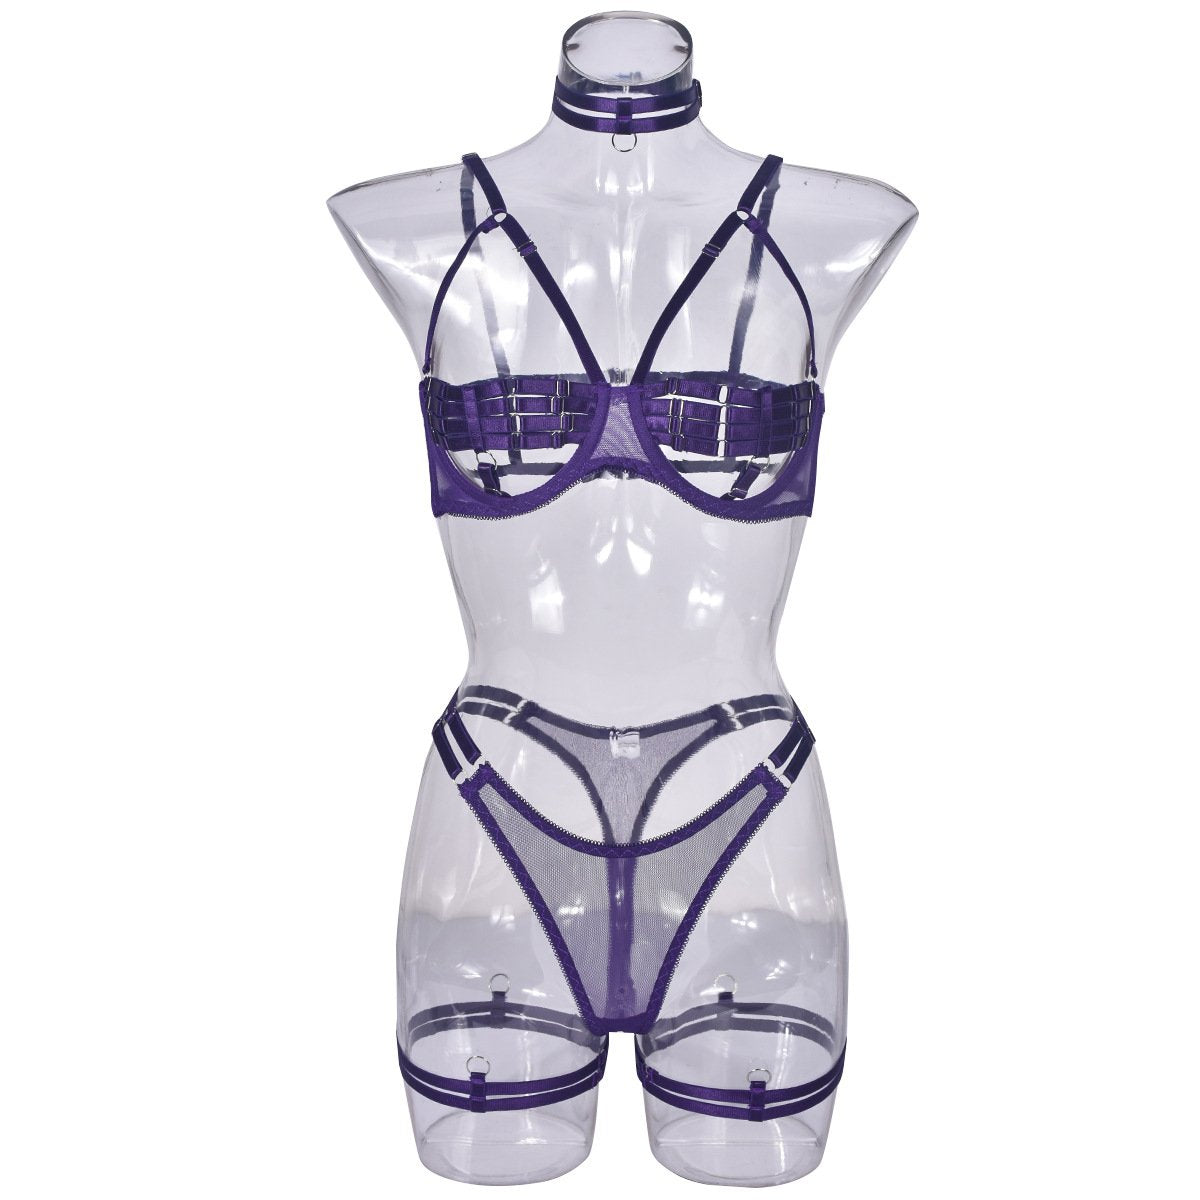 Open cup strappy underwire mesh lingerie set